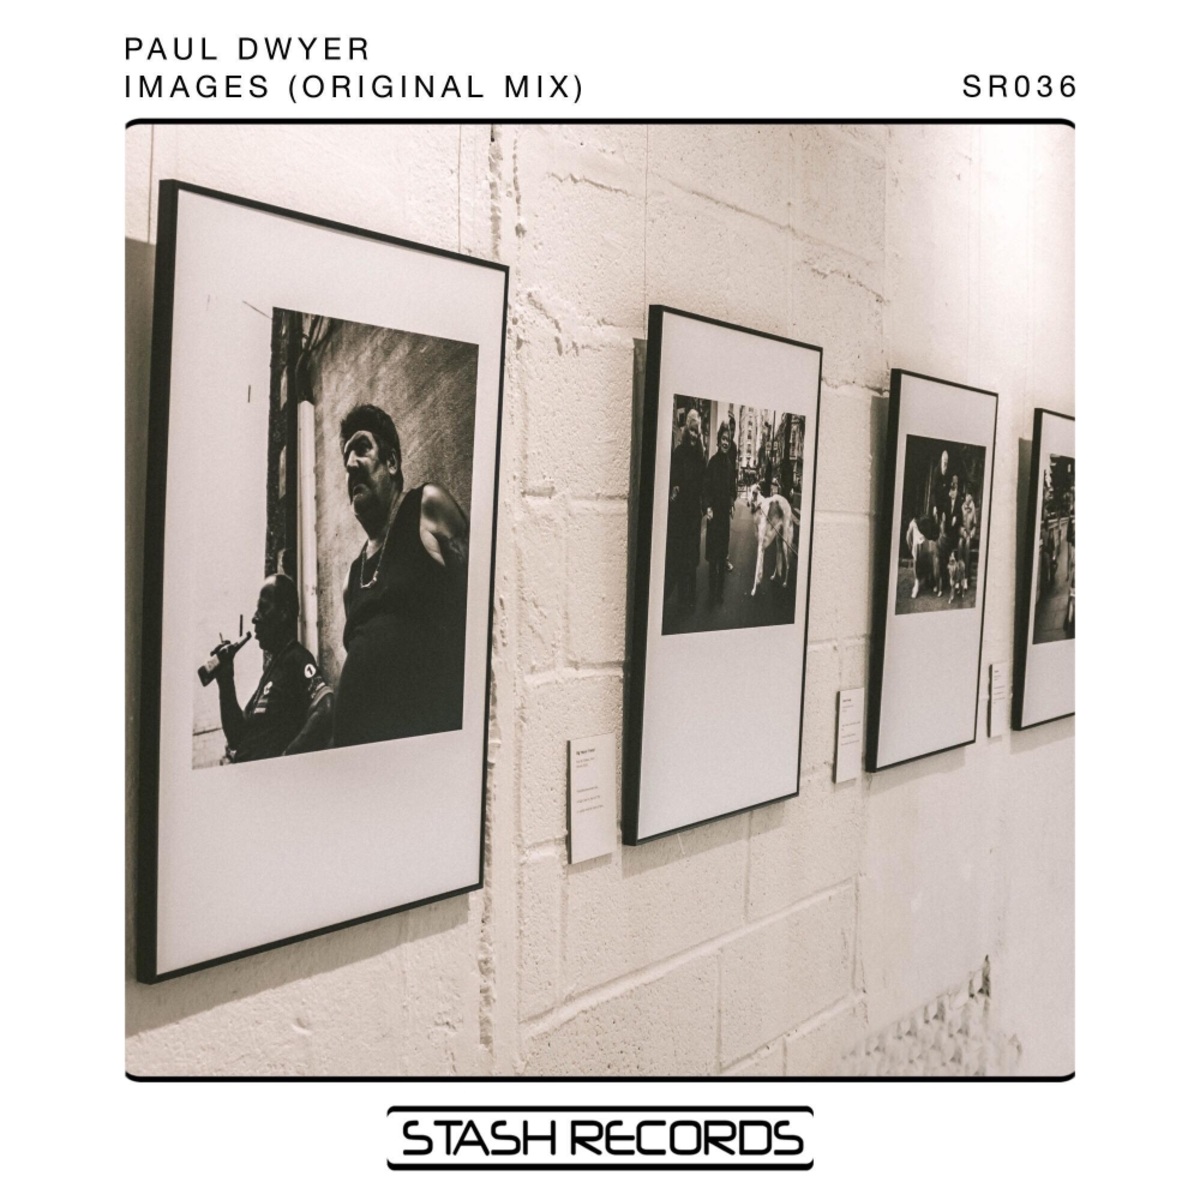 Paul Dwyer - Images / Stash Records